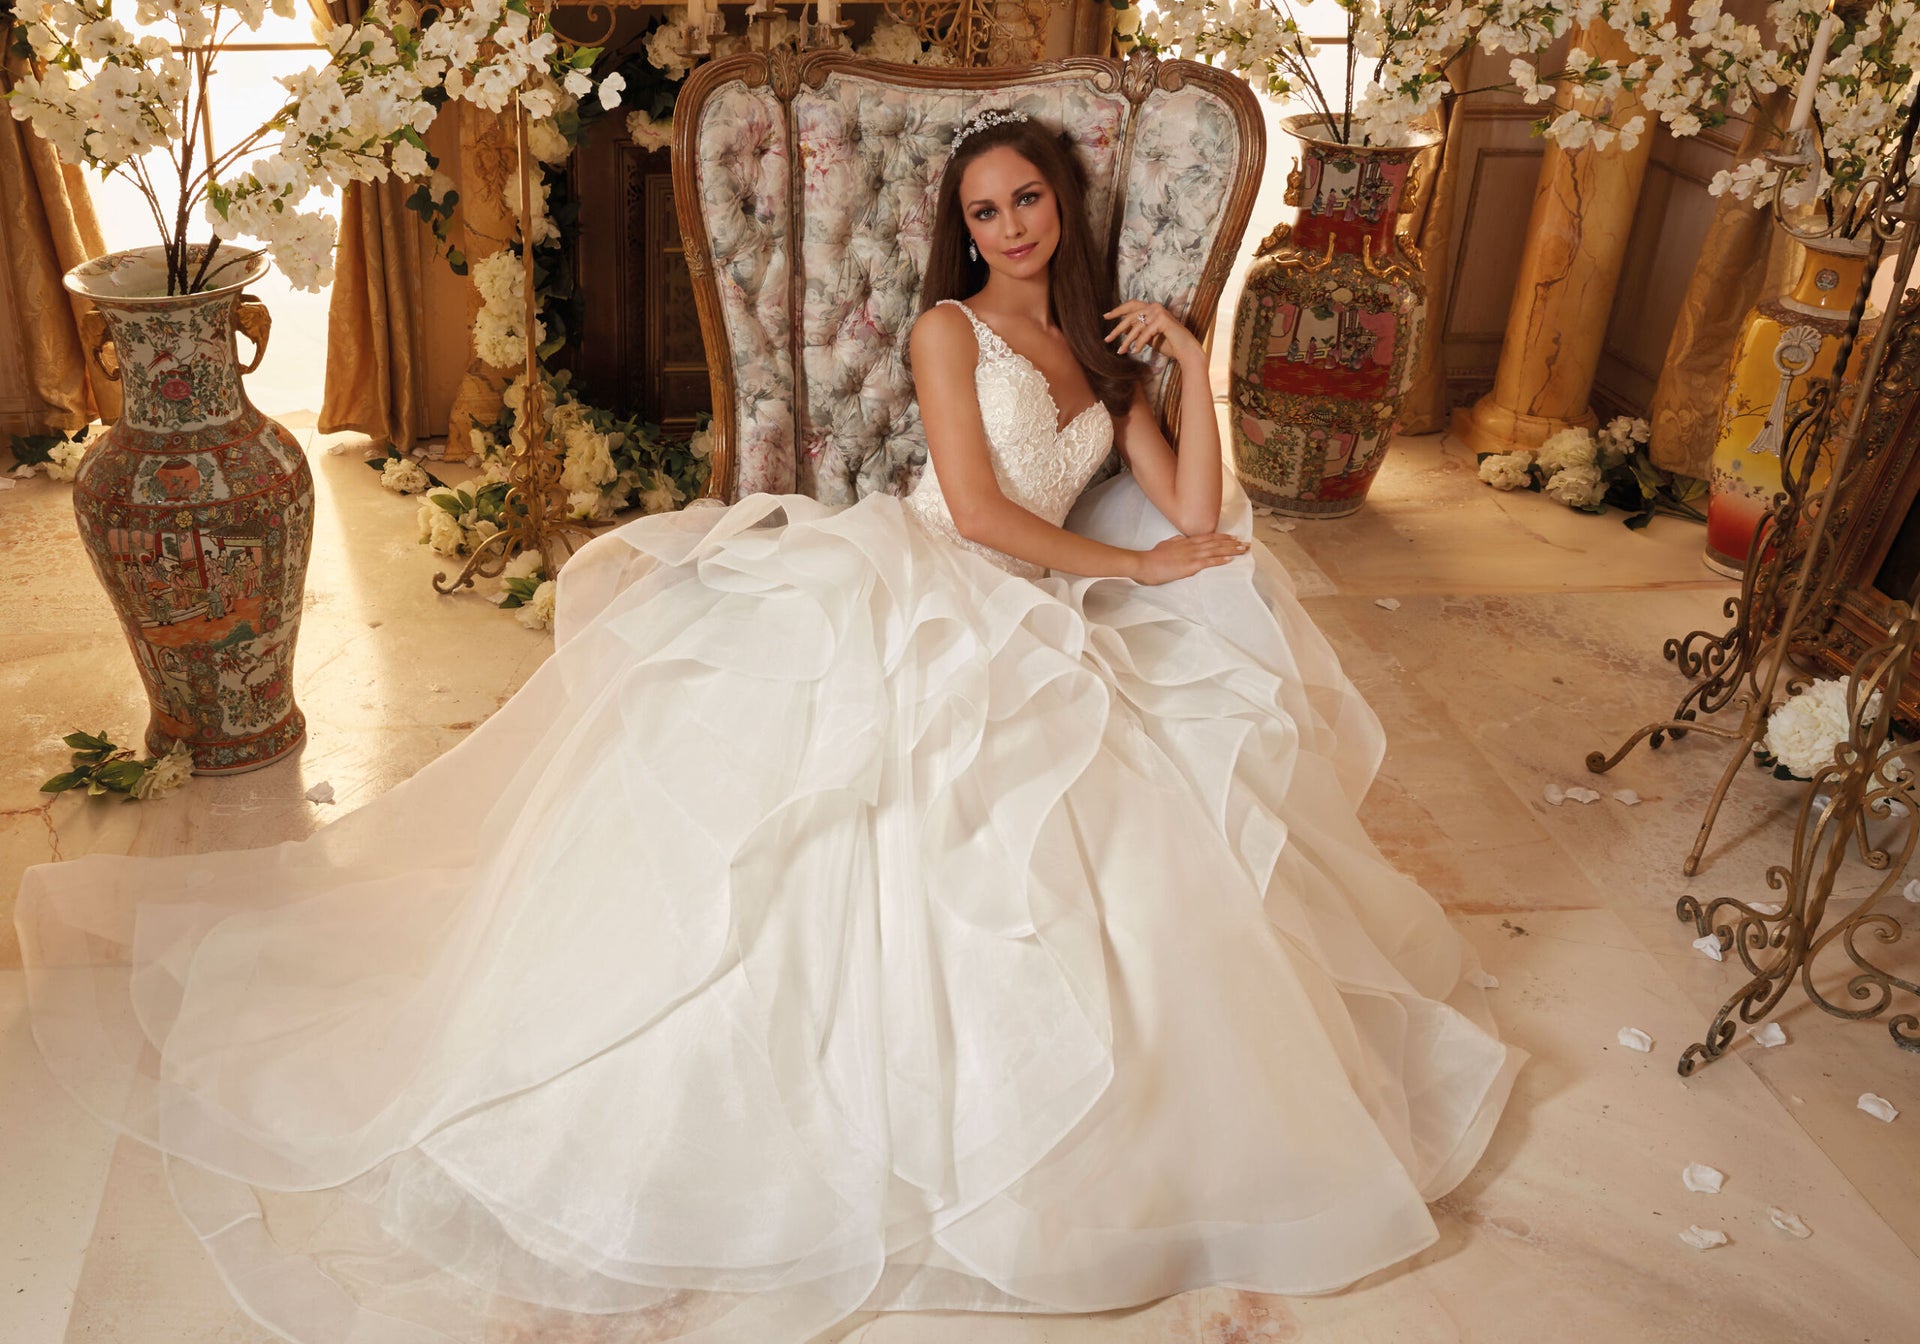 Bride sitting in a wing backed chair